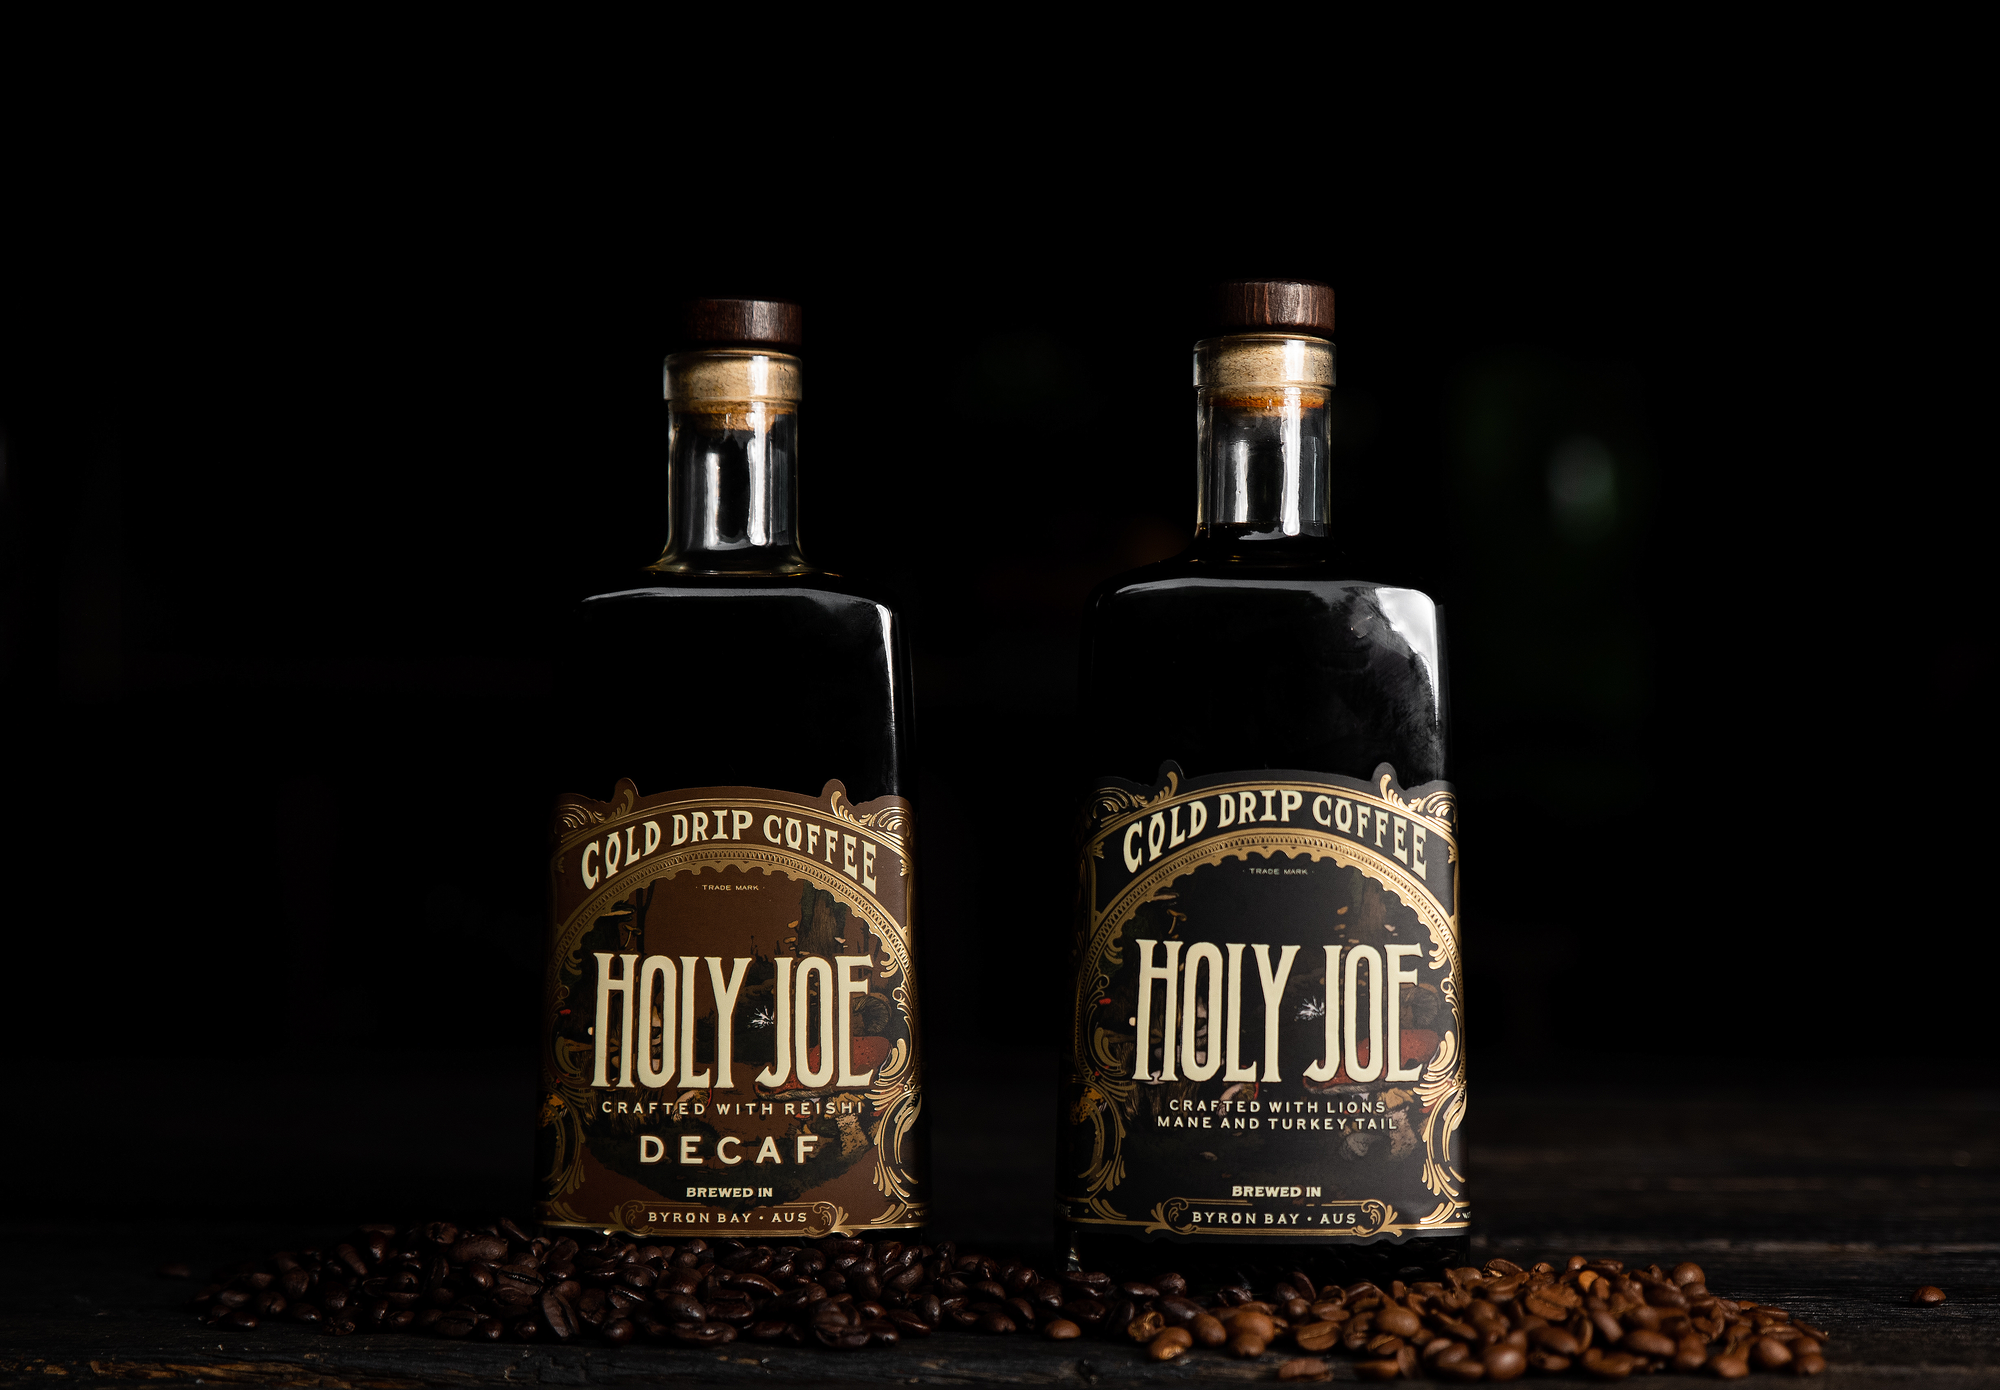 Holy Joe: The World's First Functional Cold Drip Coffee